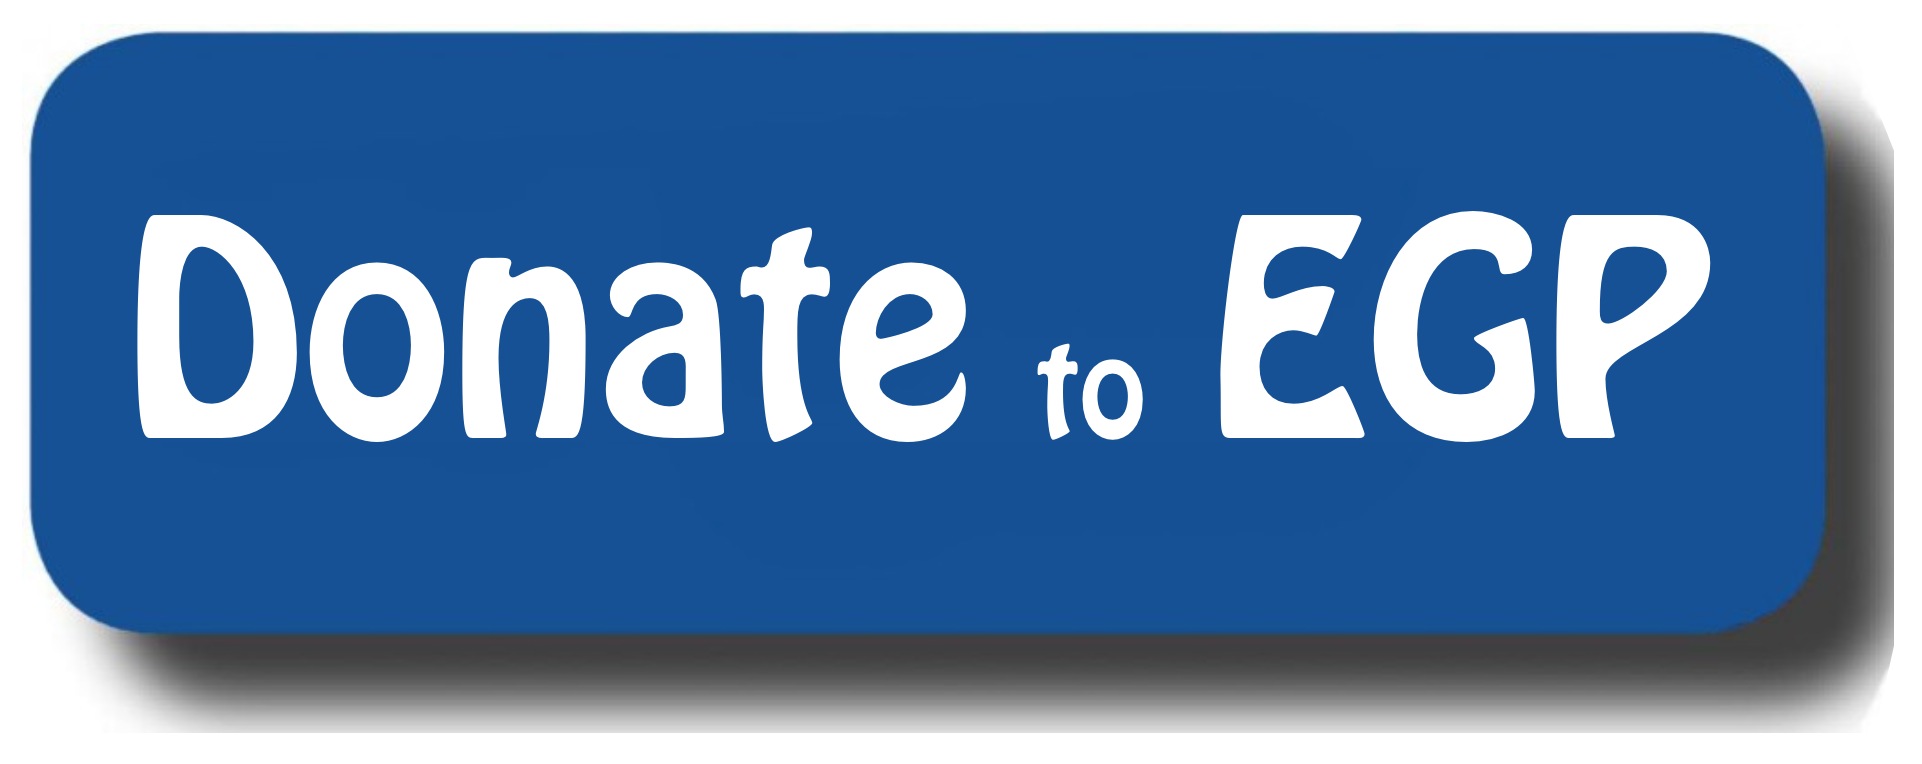 Donate to EGP online button #1